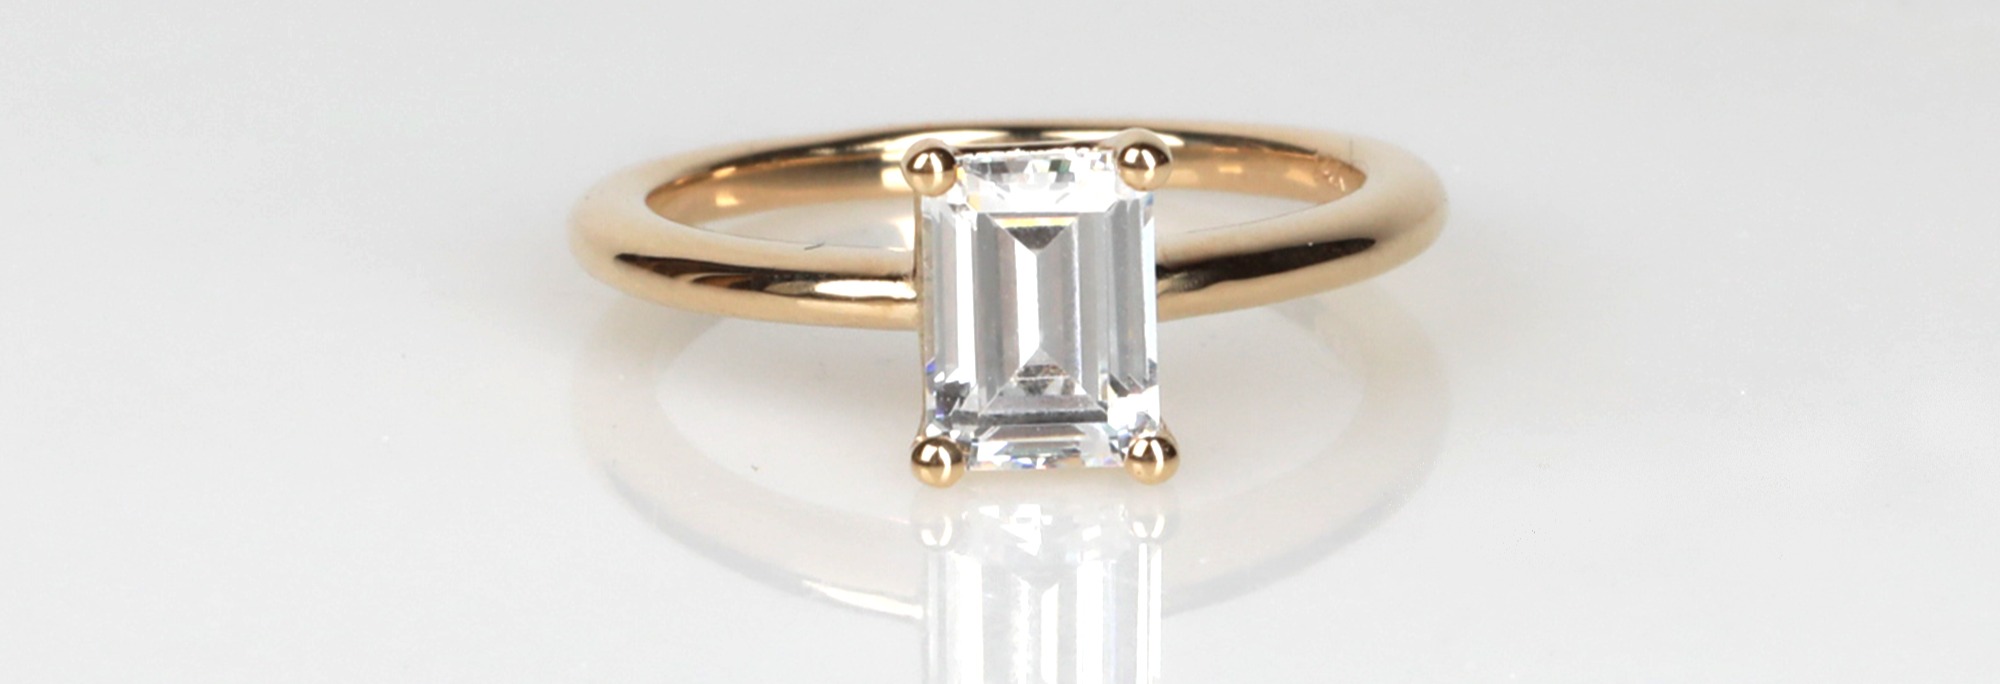 Eave Emerald Cut Engagement Ring in 18K Yellow Gold